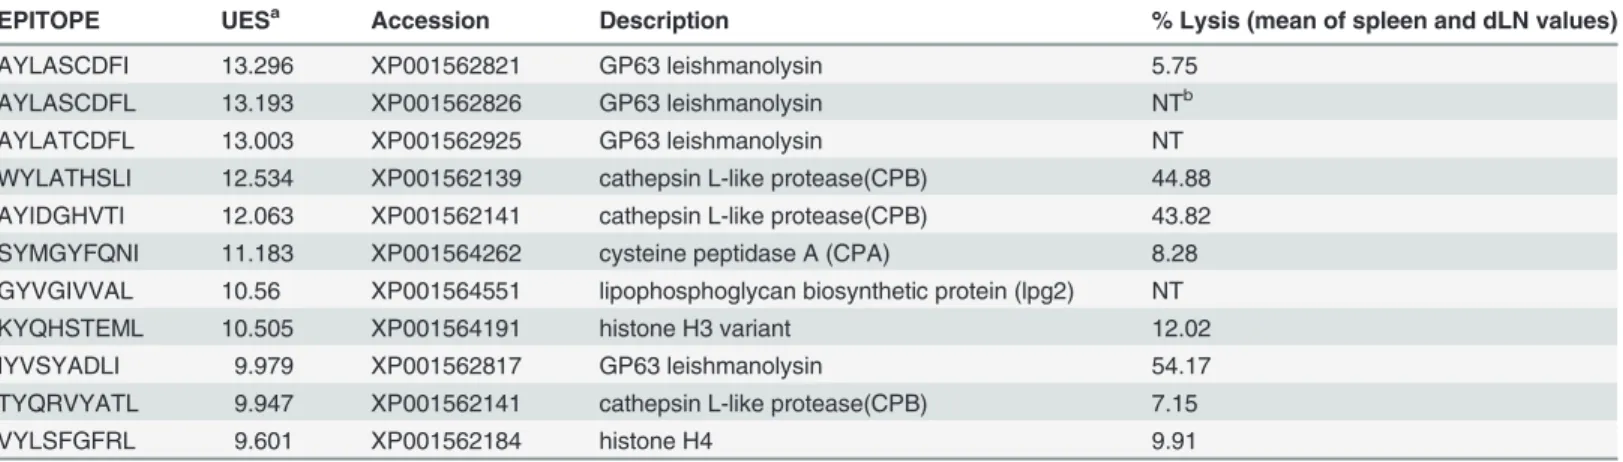 Table 2. Top L. braziliensis epitopes as predicted by EPIBOT.